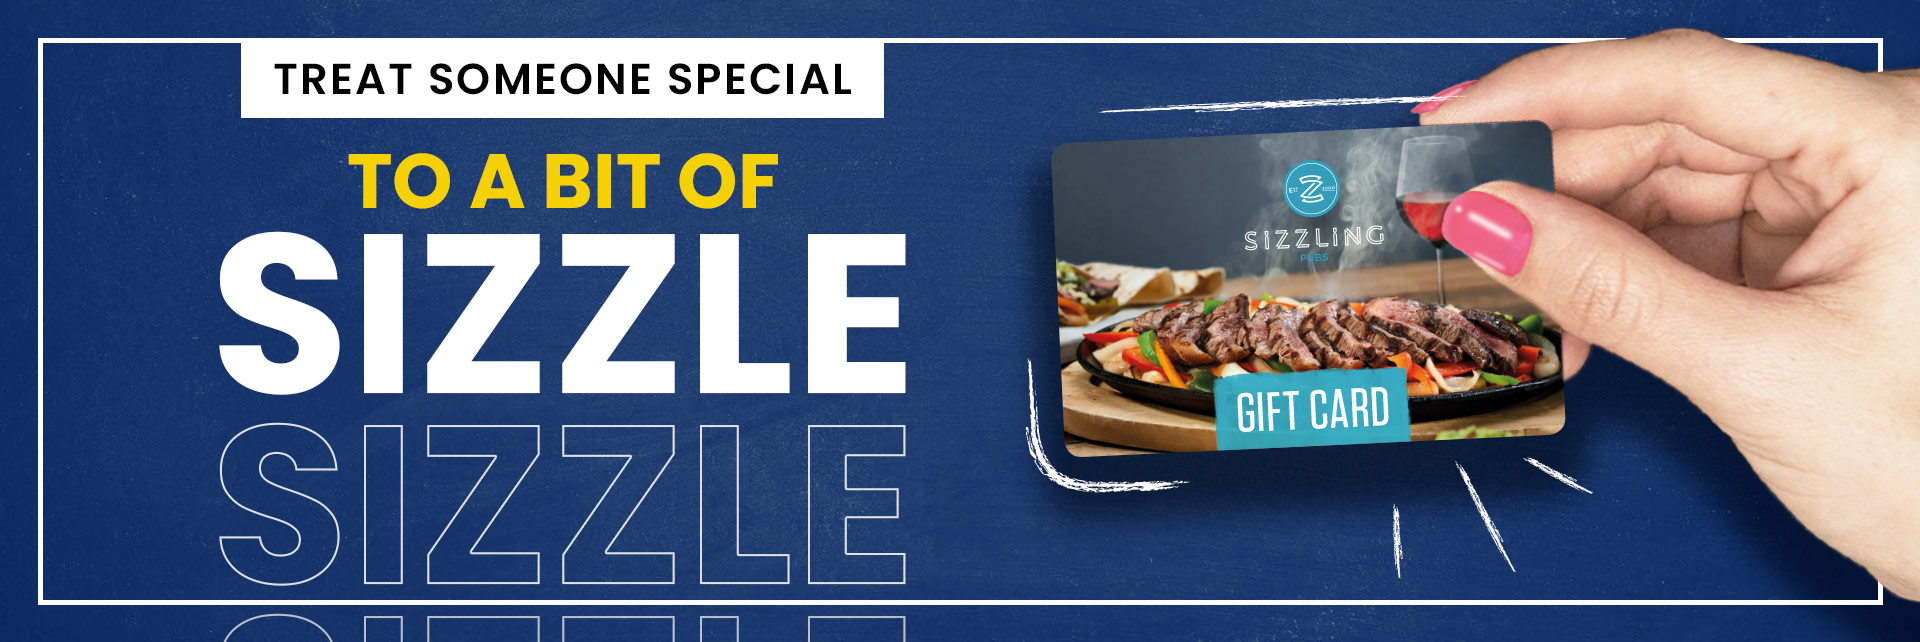 Sizzling Pubs Gift Card at The Rosette in Scarborough